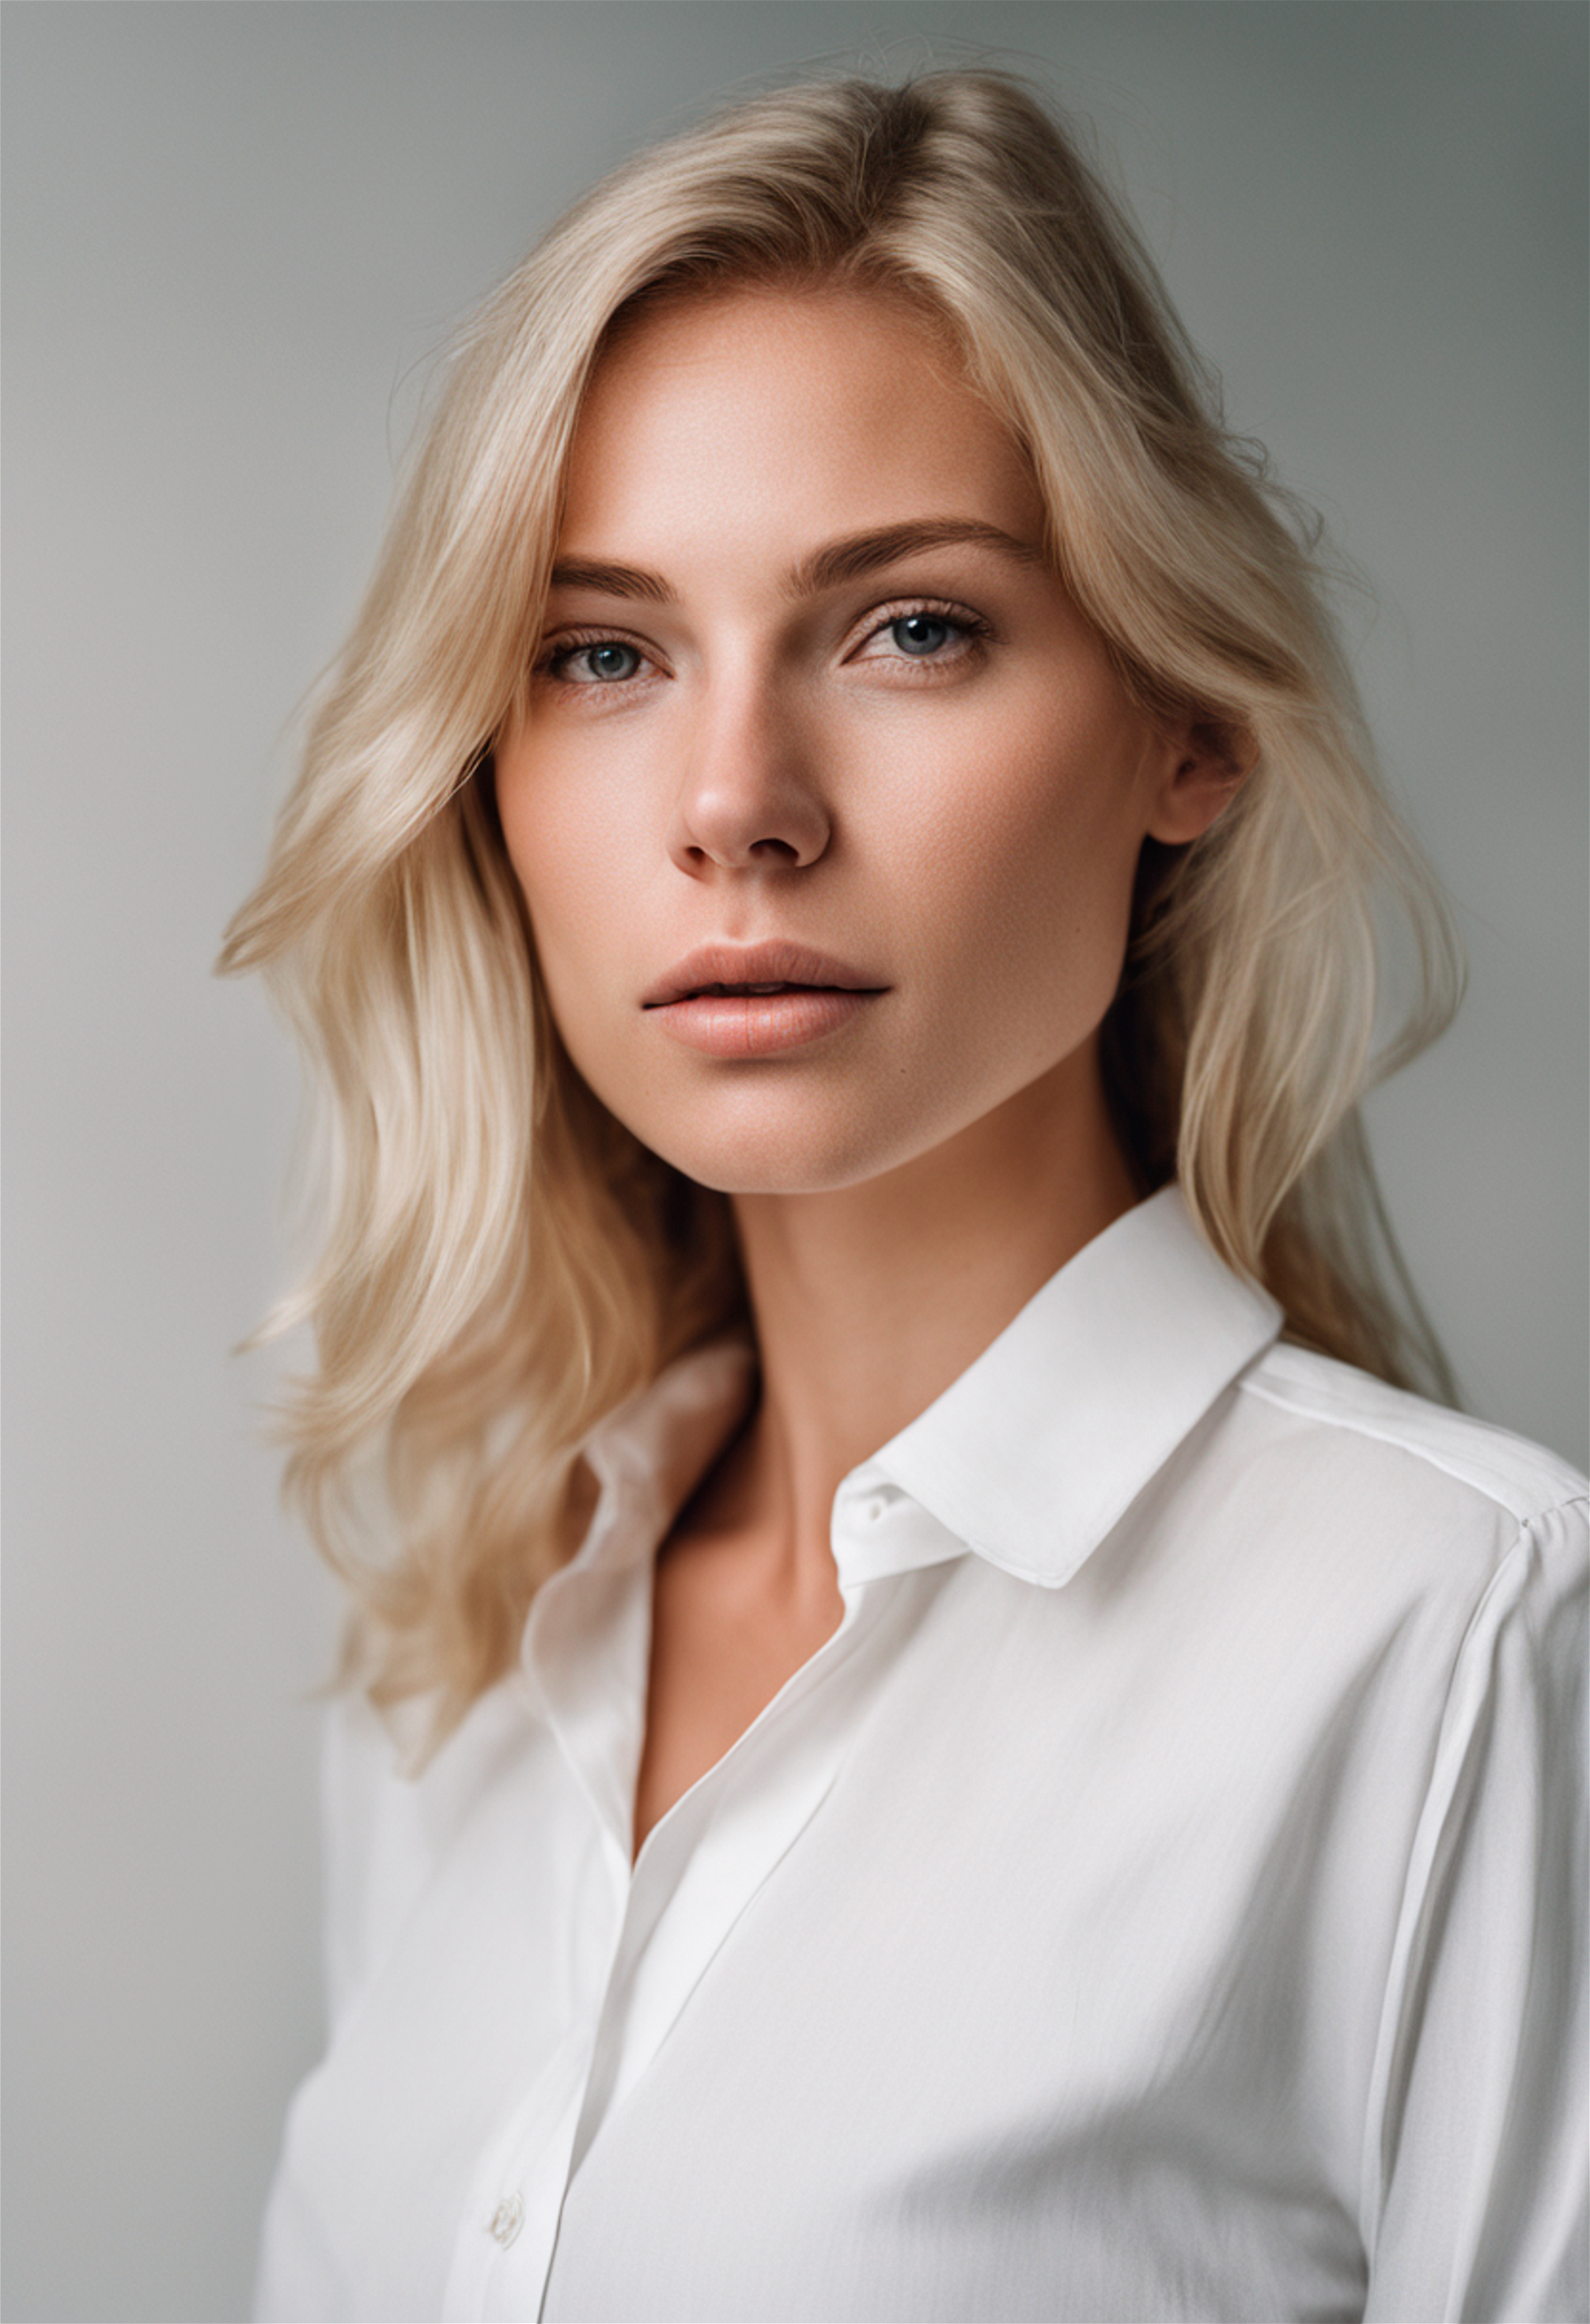 Photographic portrait of a blond woman wearing a white shirt